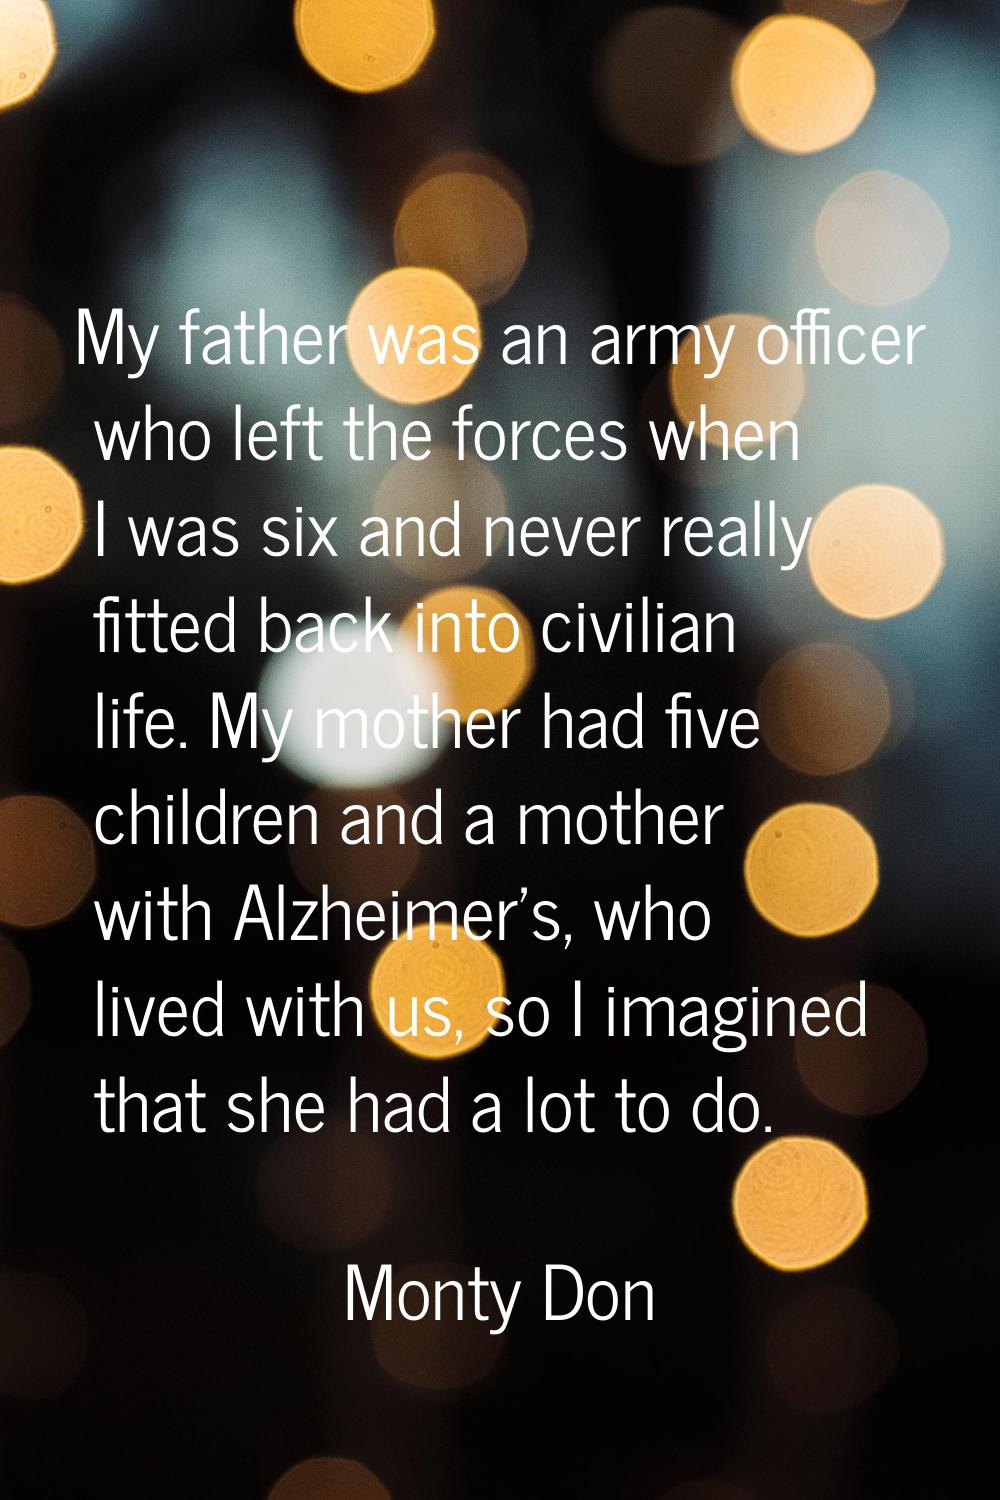 My father was an army officer who left the forces when I was six and never really fitted back into 